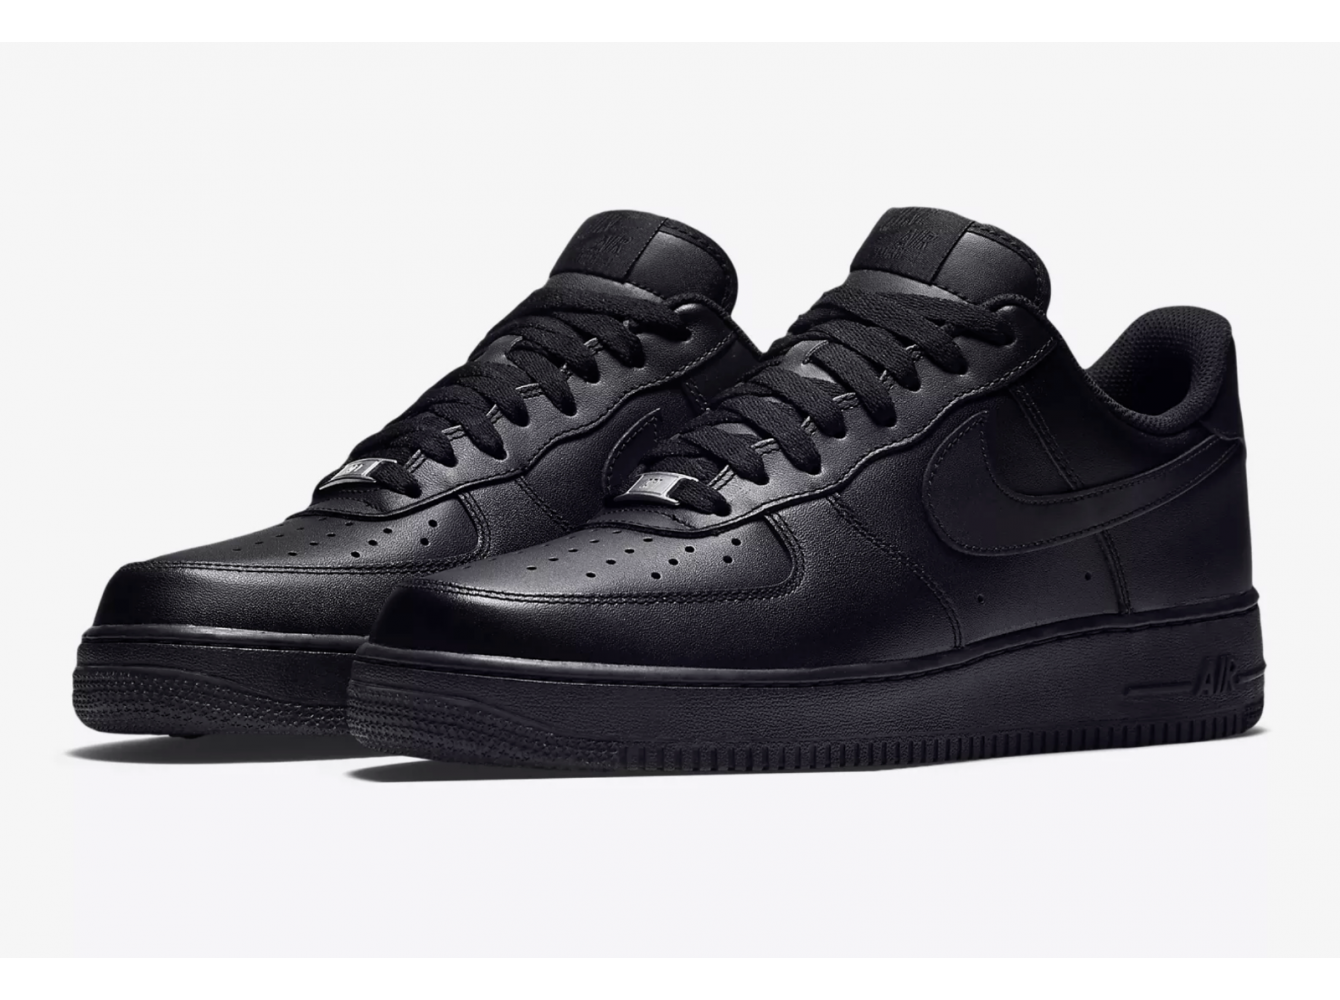 Air force 1 07 мужские. Nike Air Force 1 Low черные. Nike Air Force 1 '07 Low all Black черные. Nike Air Force 1 07 Black мужские. Nike Air Force 1 Low 07.